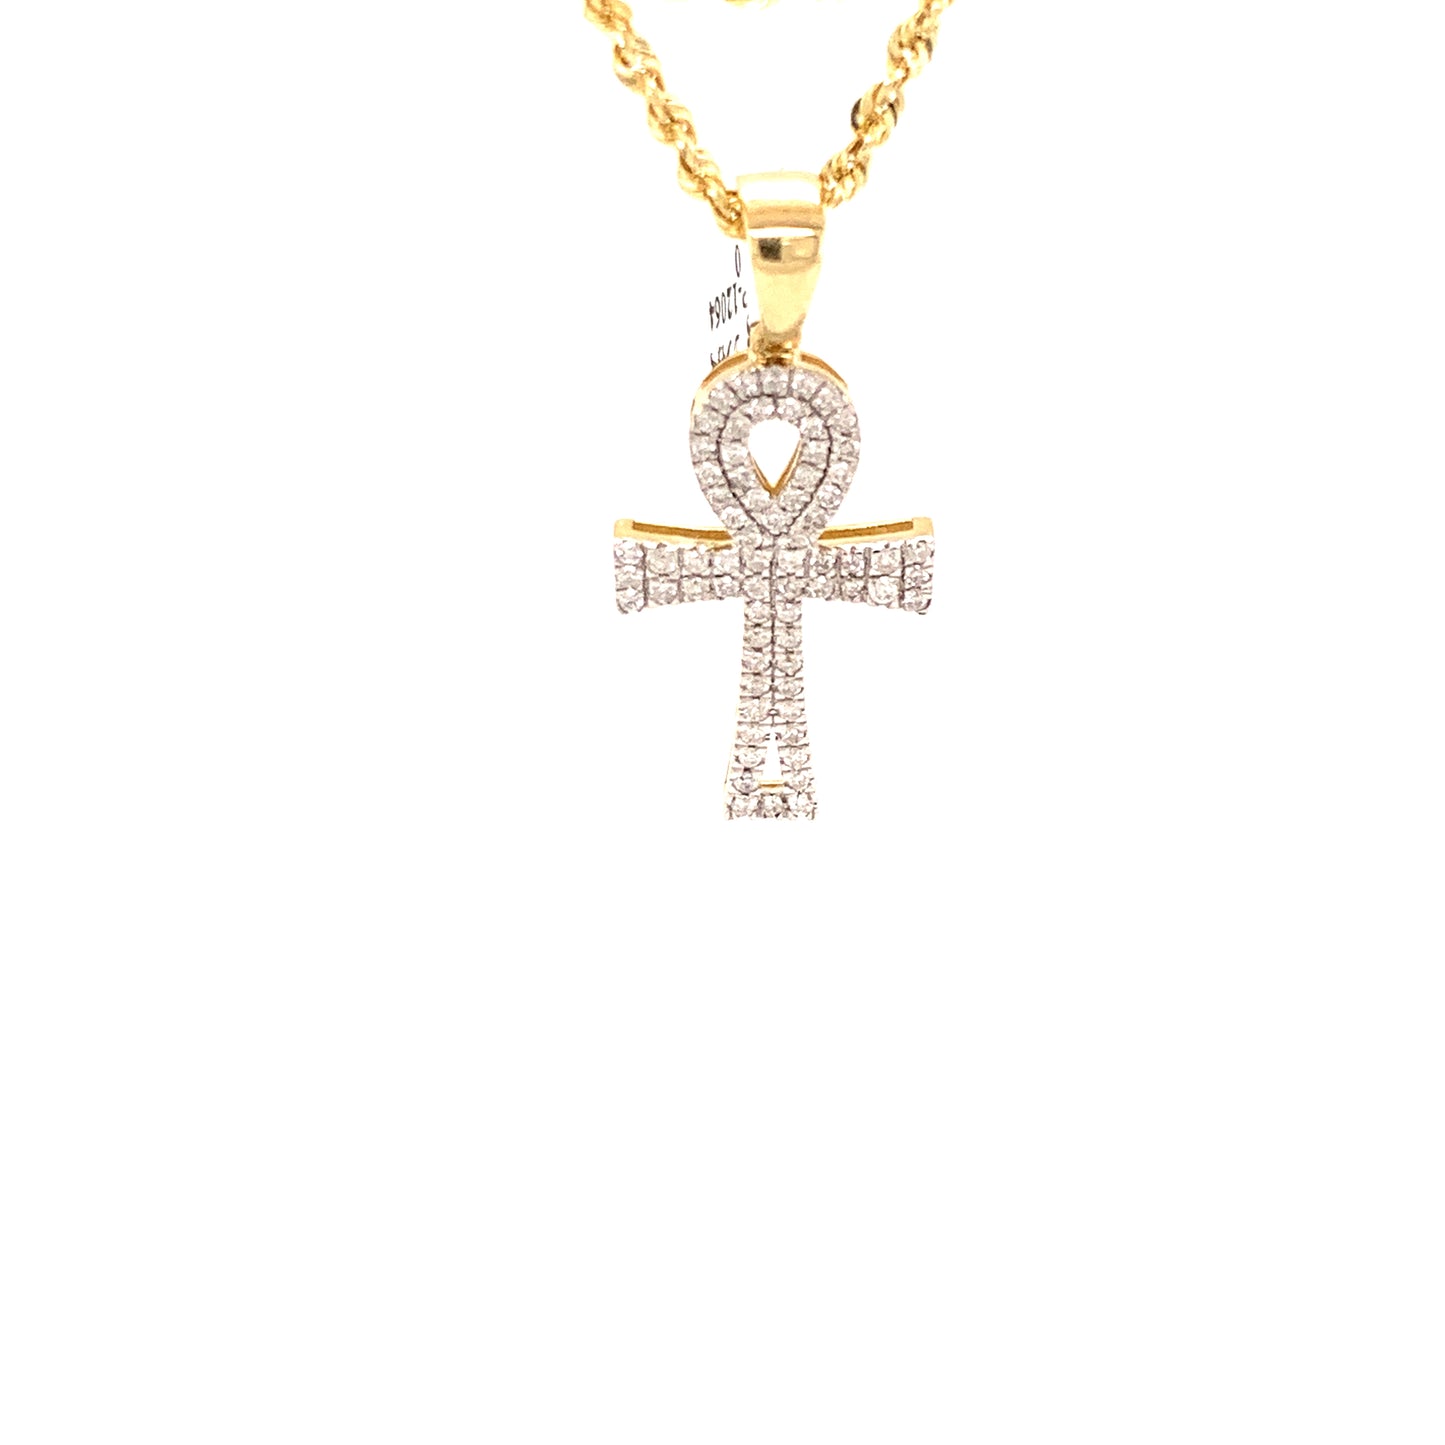 10k Yellow Gold and diamond Ankh Pendant with chain